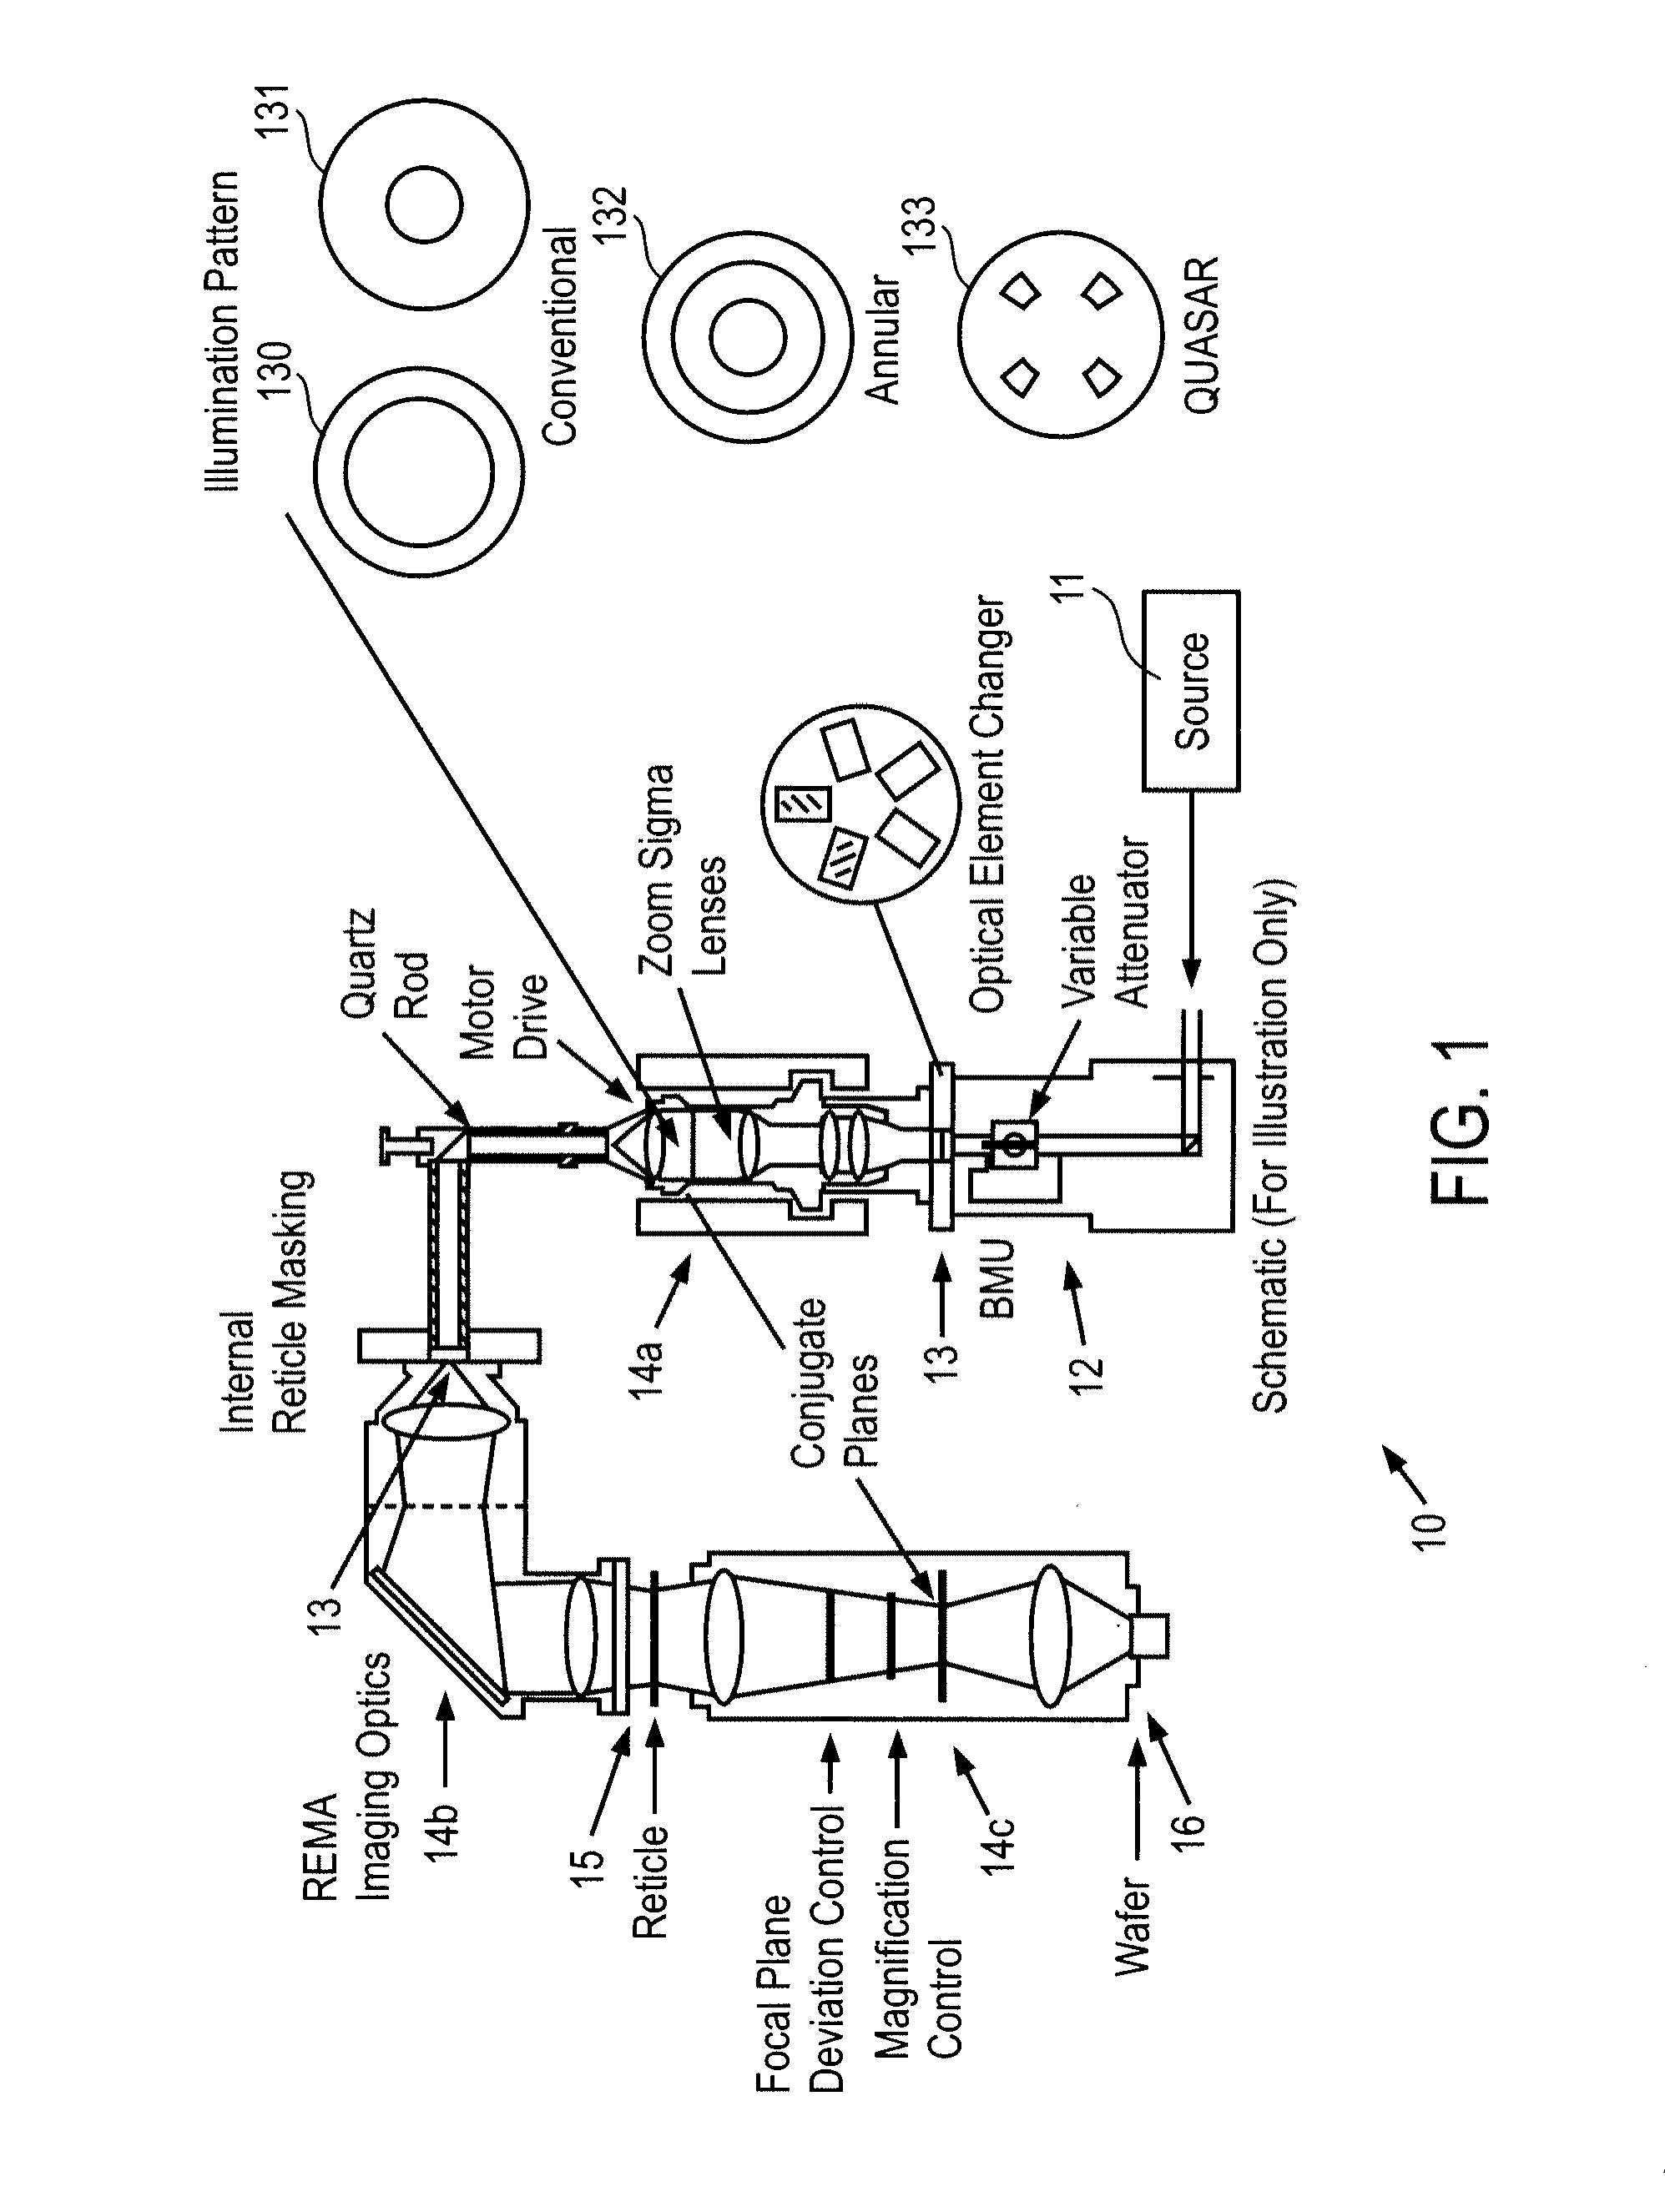 Lens heating compensation systems and methods